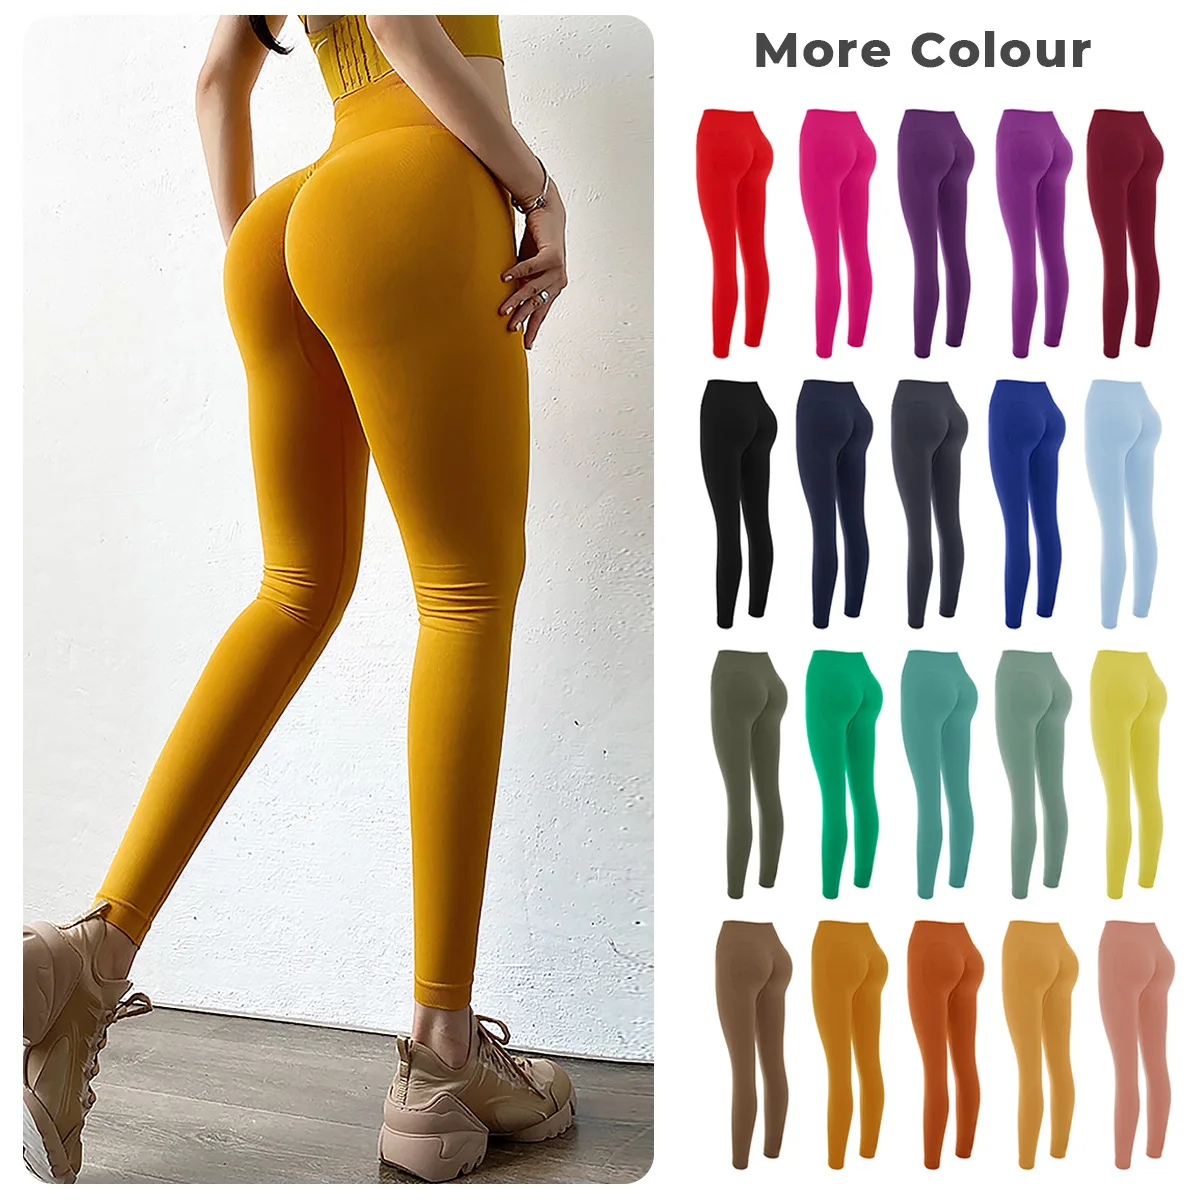 

2021 Women mujer Nylon Spandex Squat Proof Scrunch butt push up fitness leggins gym leggings workout tights Seamless Yoga Pants, As pictures